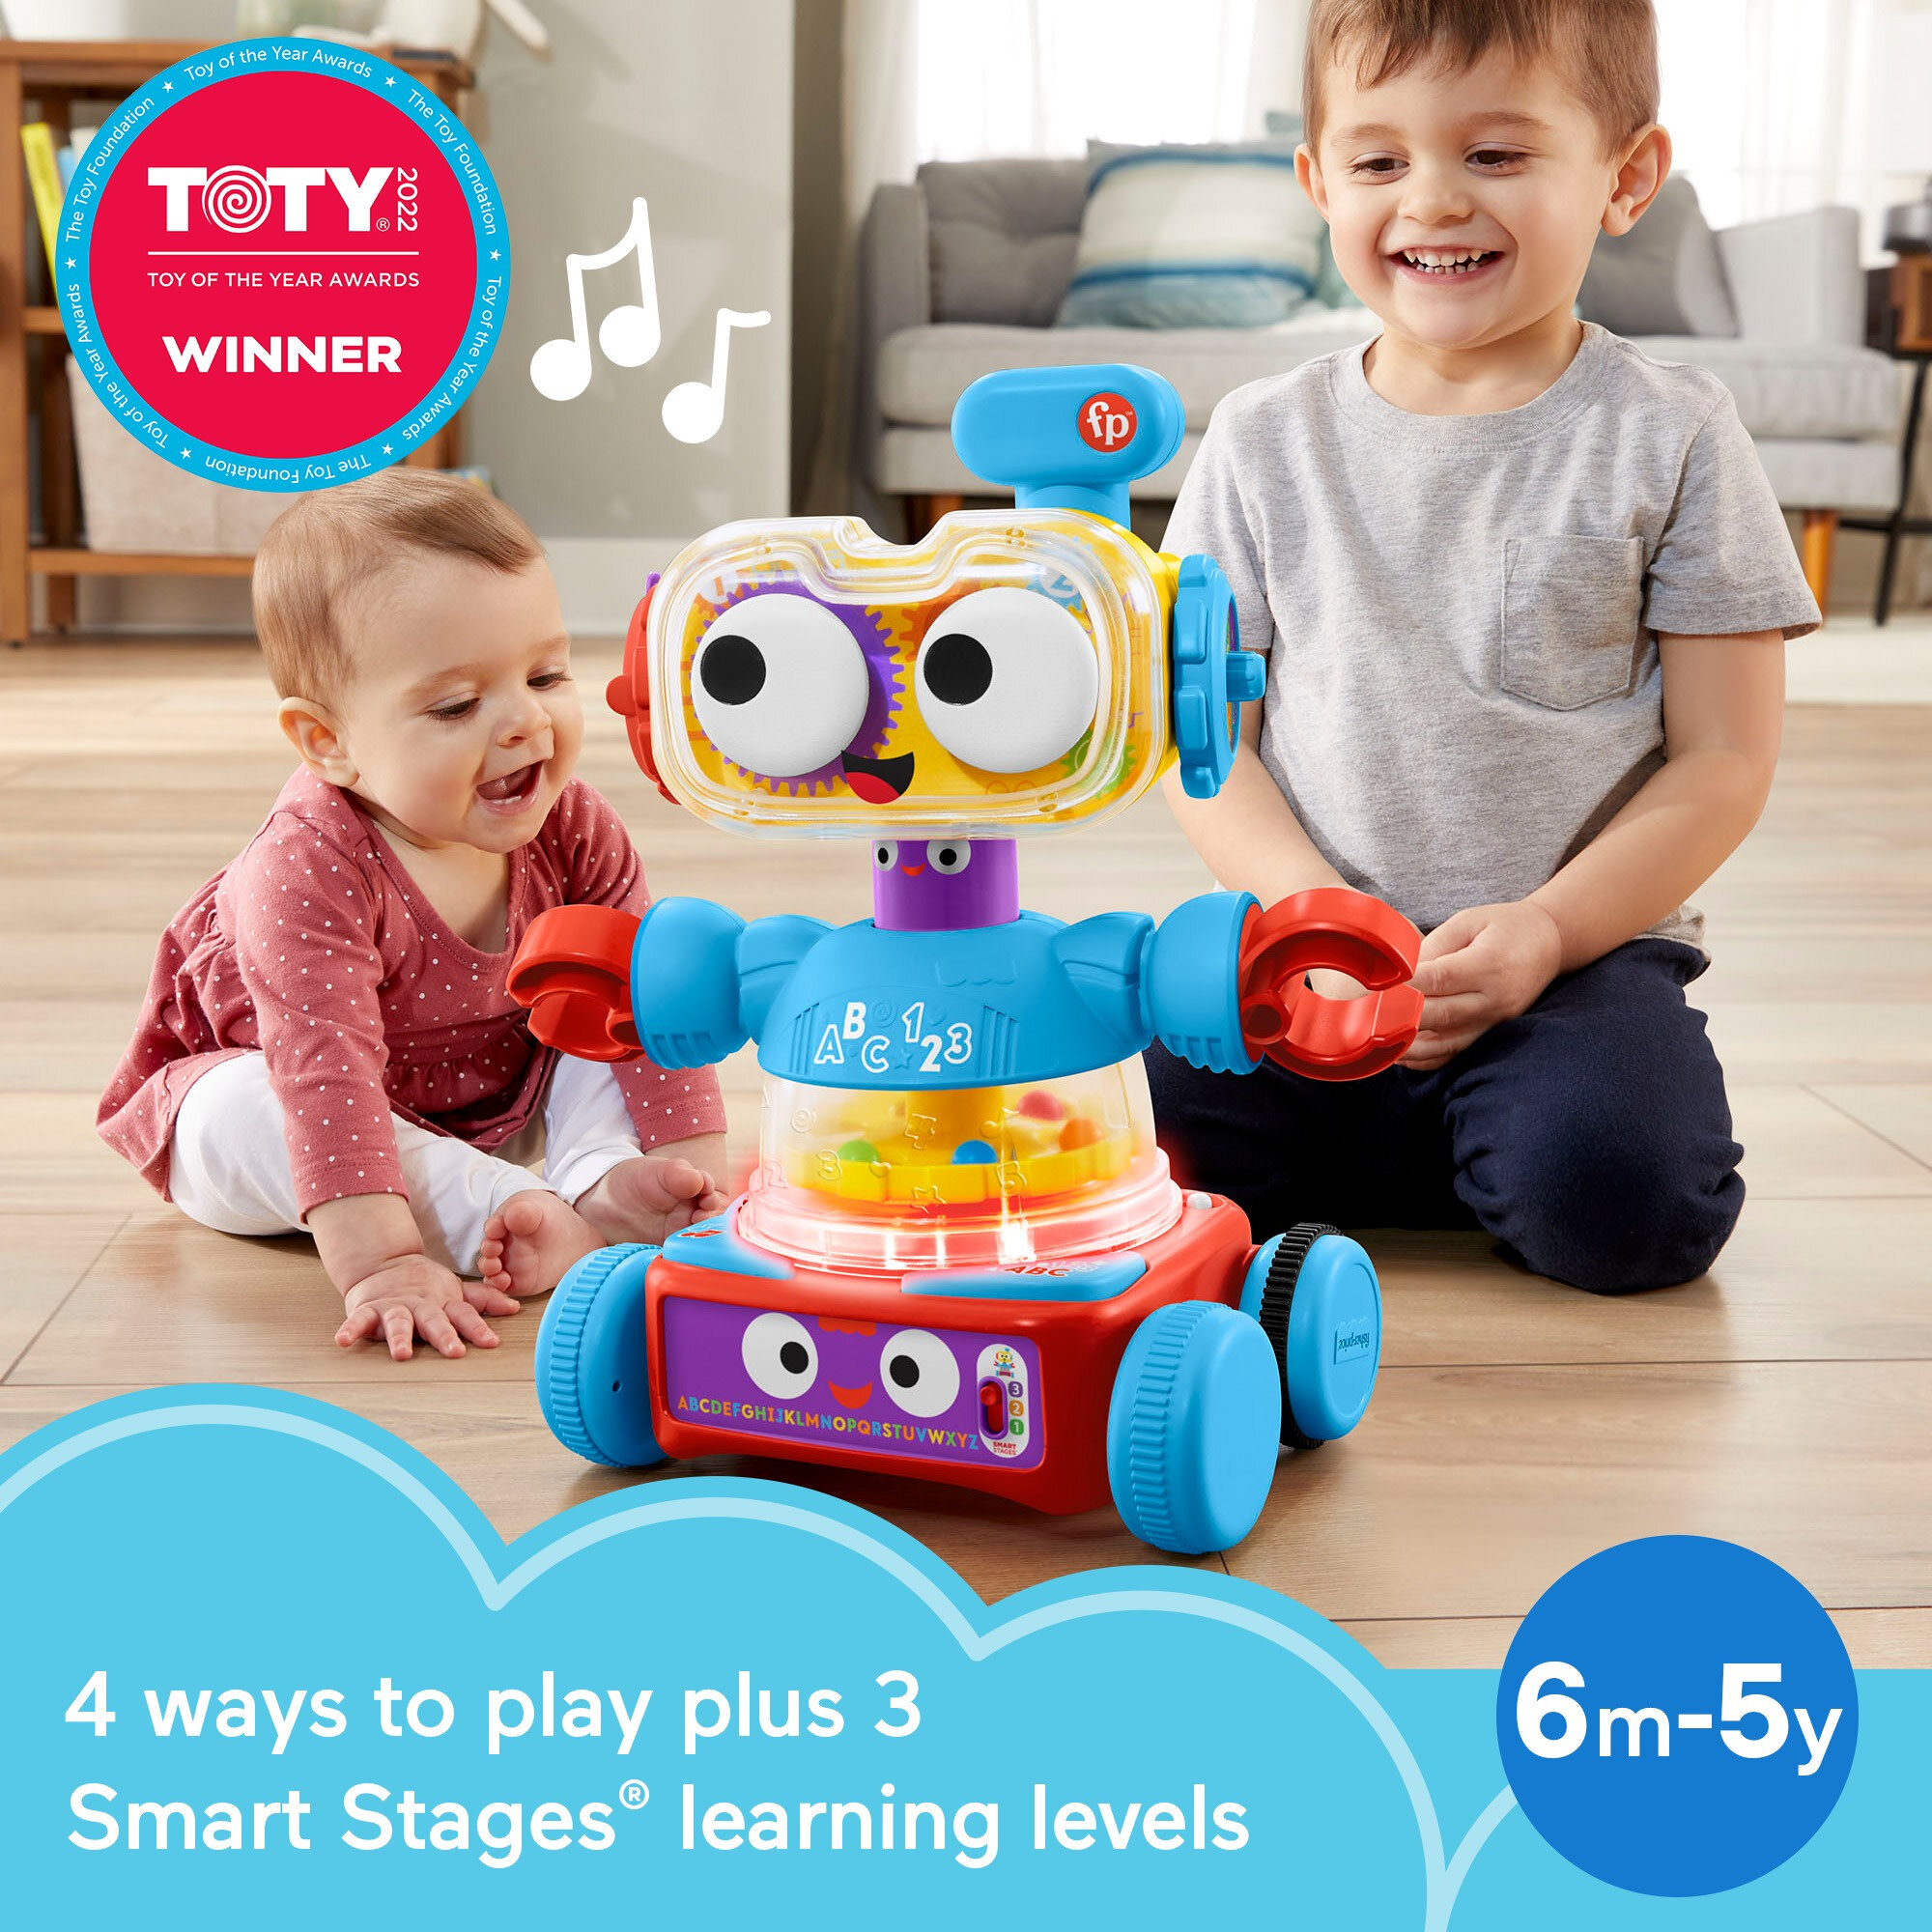 Fisher-Price 4-in-1 Learning Bot Interactive Toy Robot for Infants Toddlers and Preschool Kids - image 3 of 8